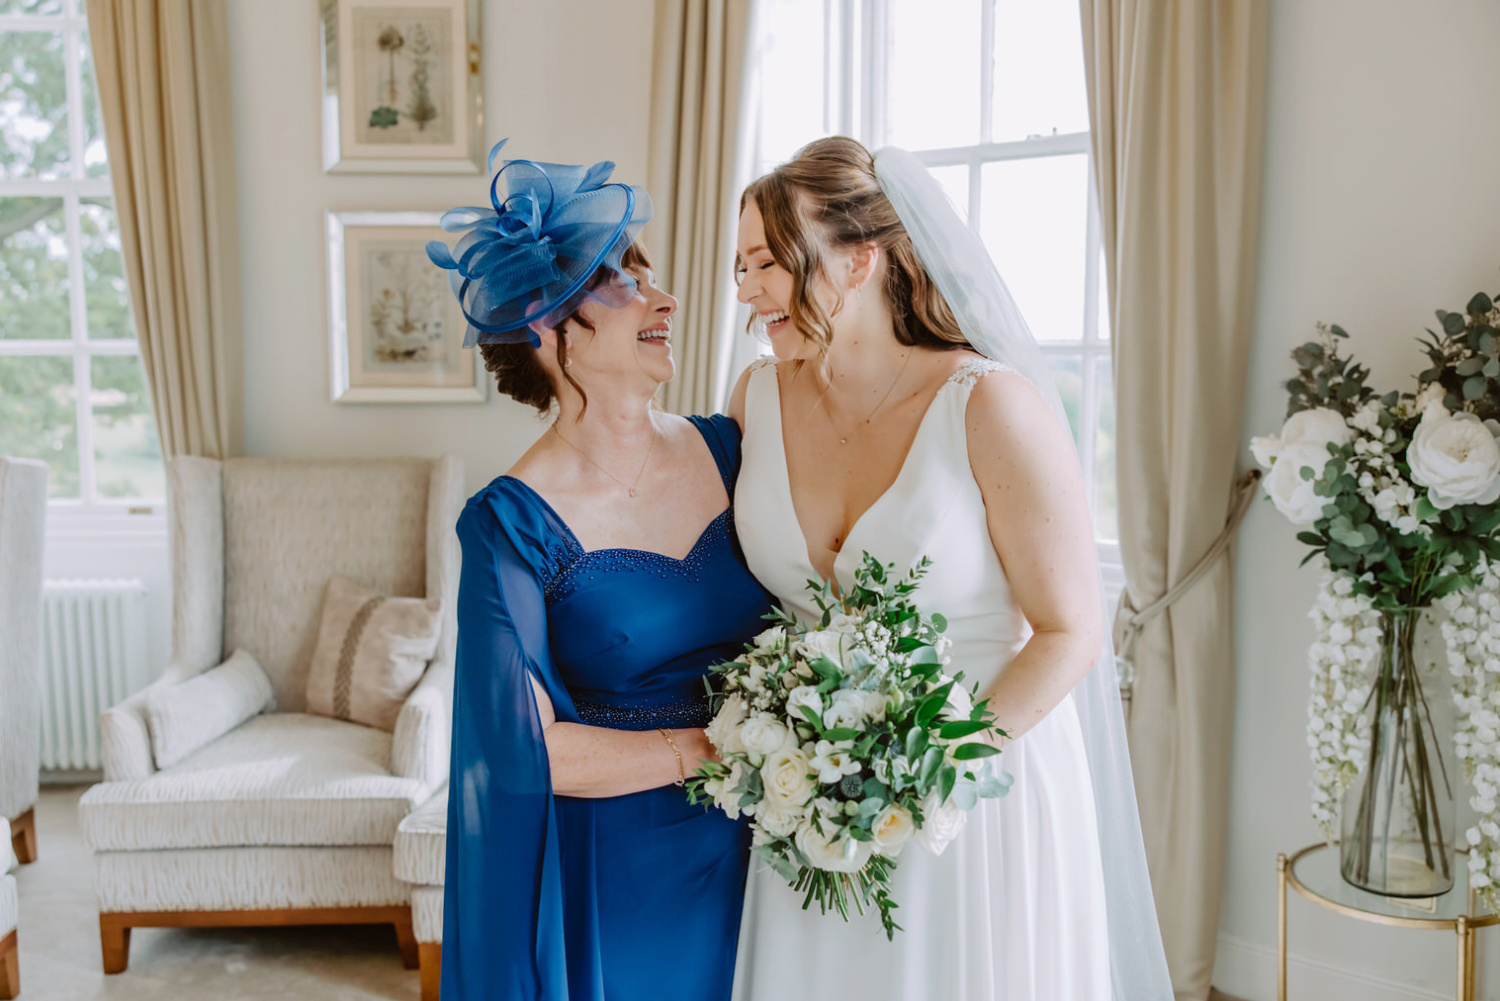 A bride and her mother in a blue dress.